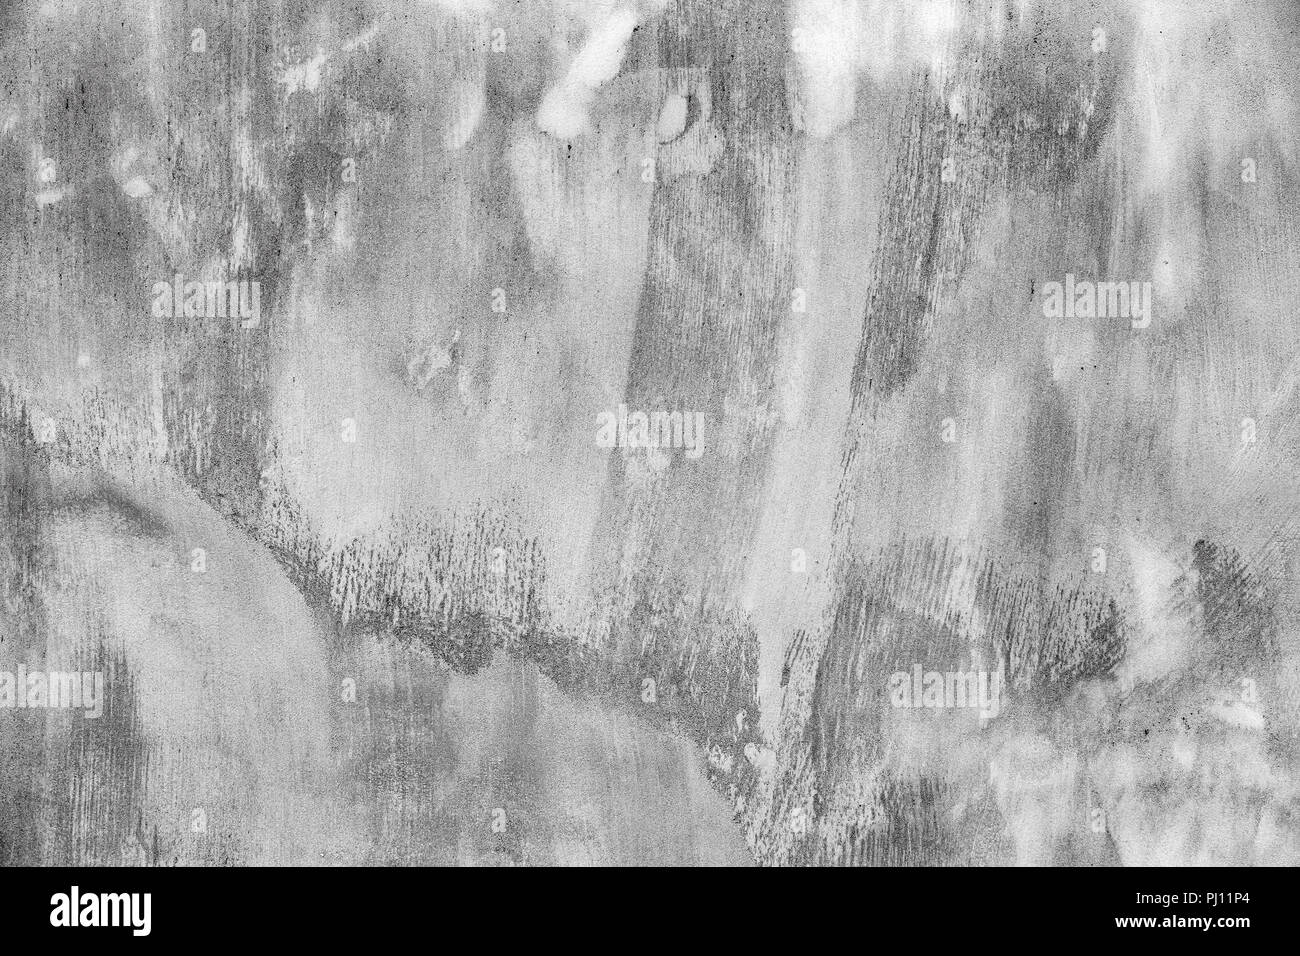 Gray Concrete Wall With White Paint Brush Strokes Background Photo Texture Stock Photo Alamy